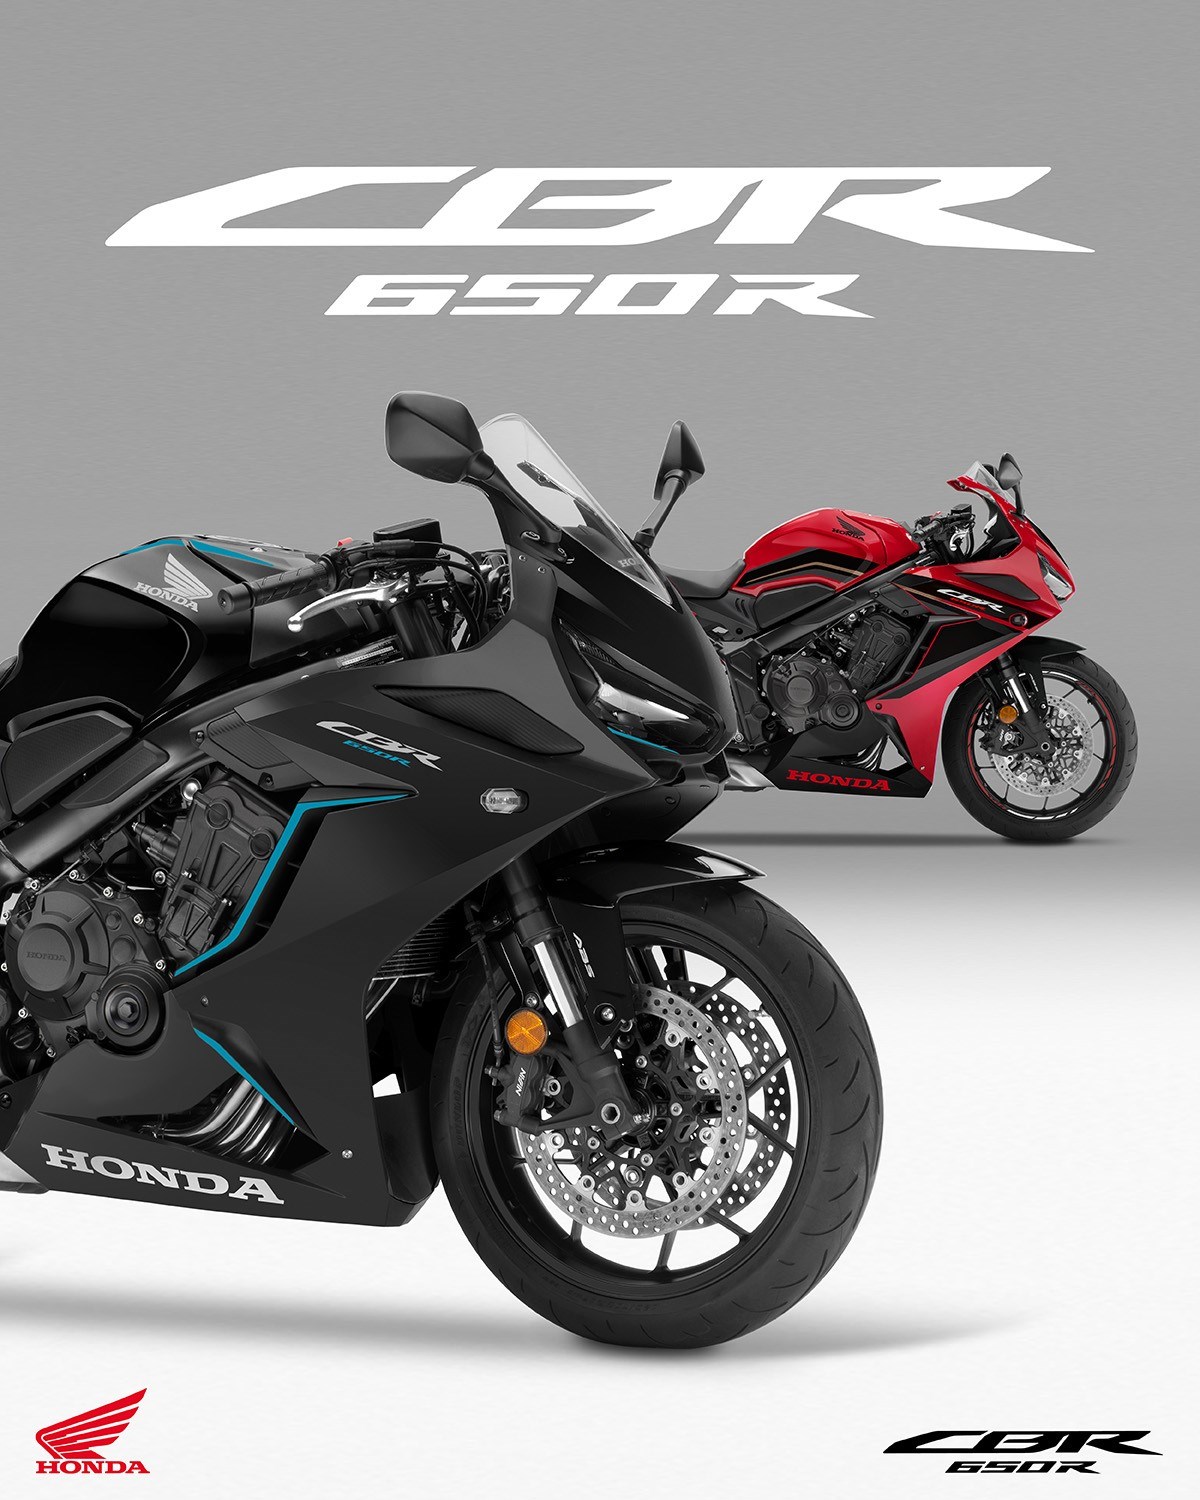 Honda's CB650R and CBR650R receive new visual updates for 23YM